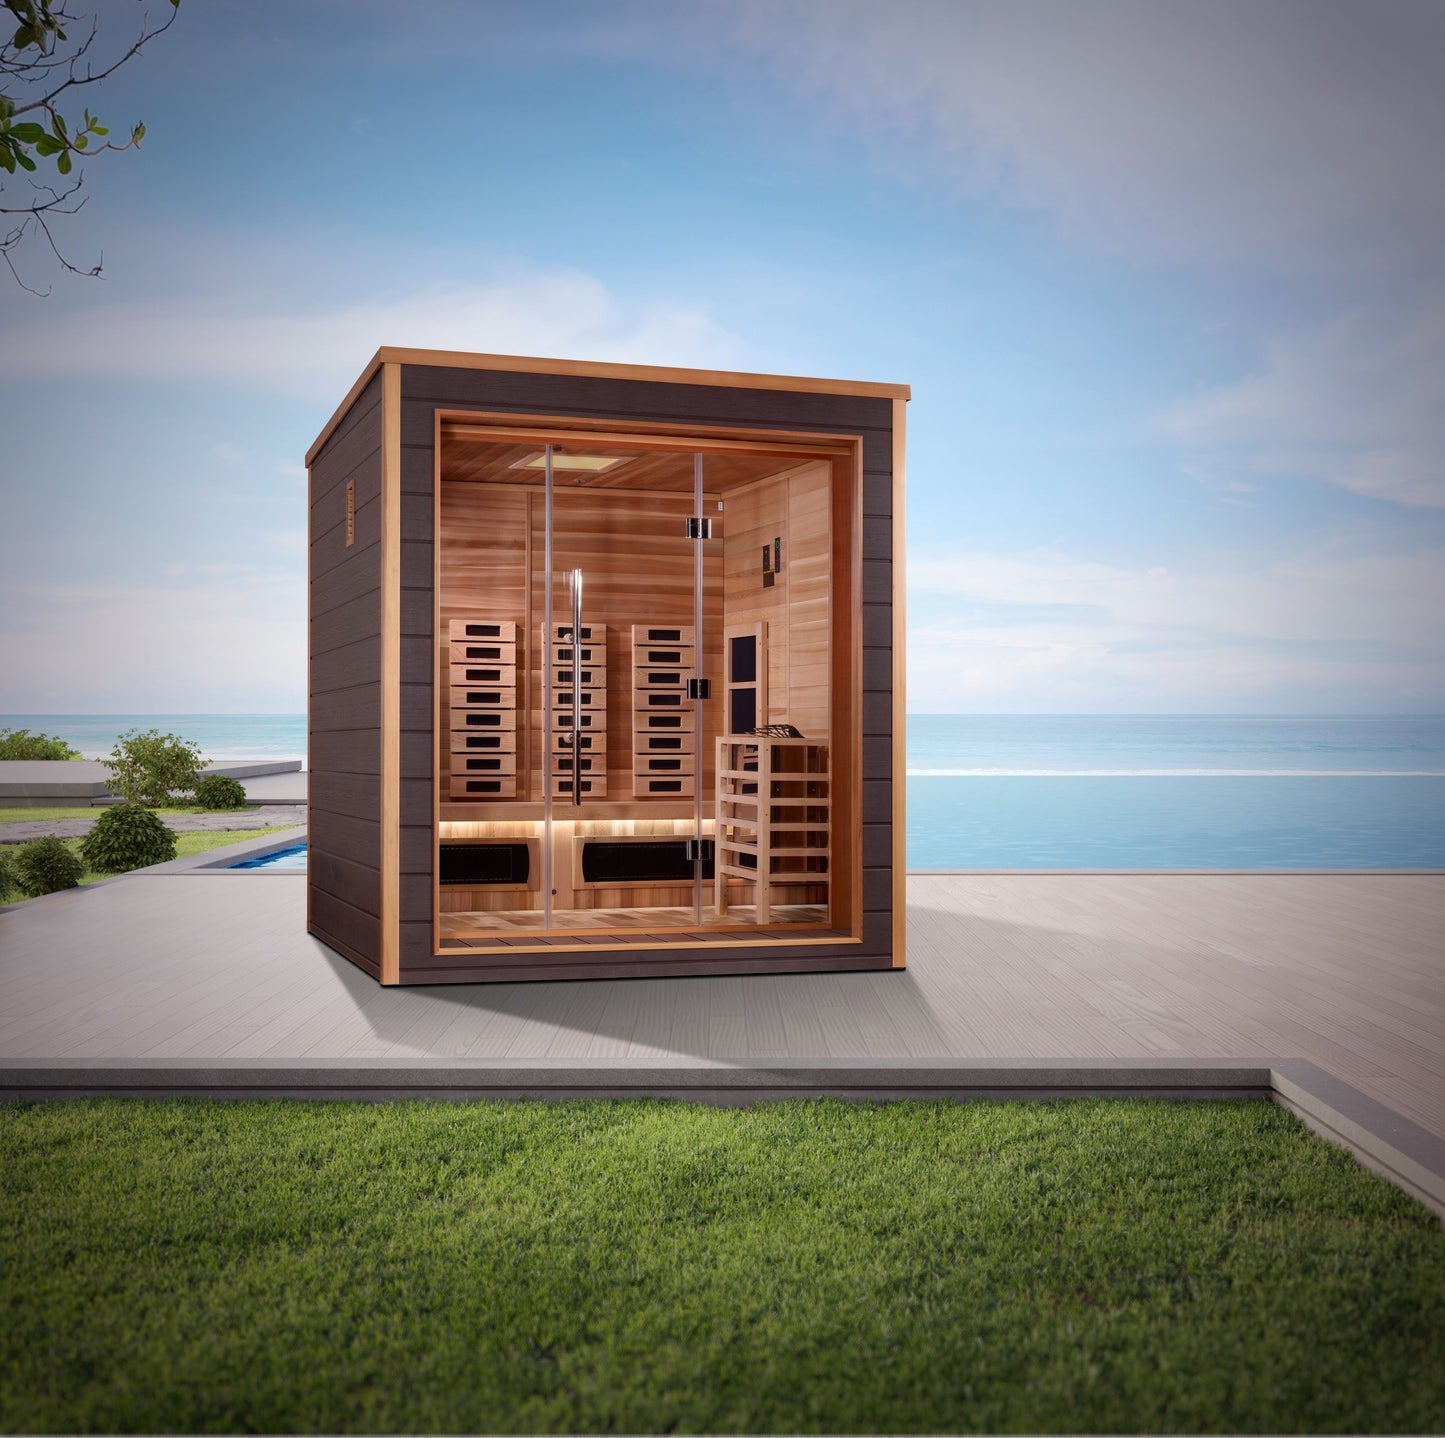 Golden Designs Visby 3 Person Hybrid (PureTech™ Full Spectrum IR or Traditional Stove) Outdoor Sauna (GDI-8223-01)